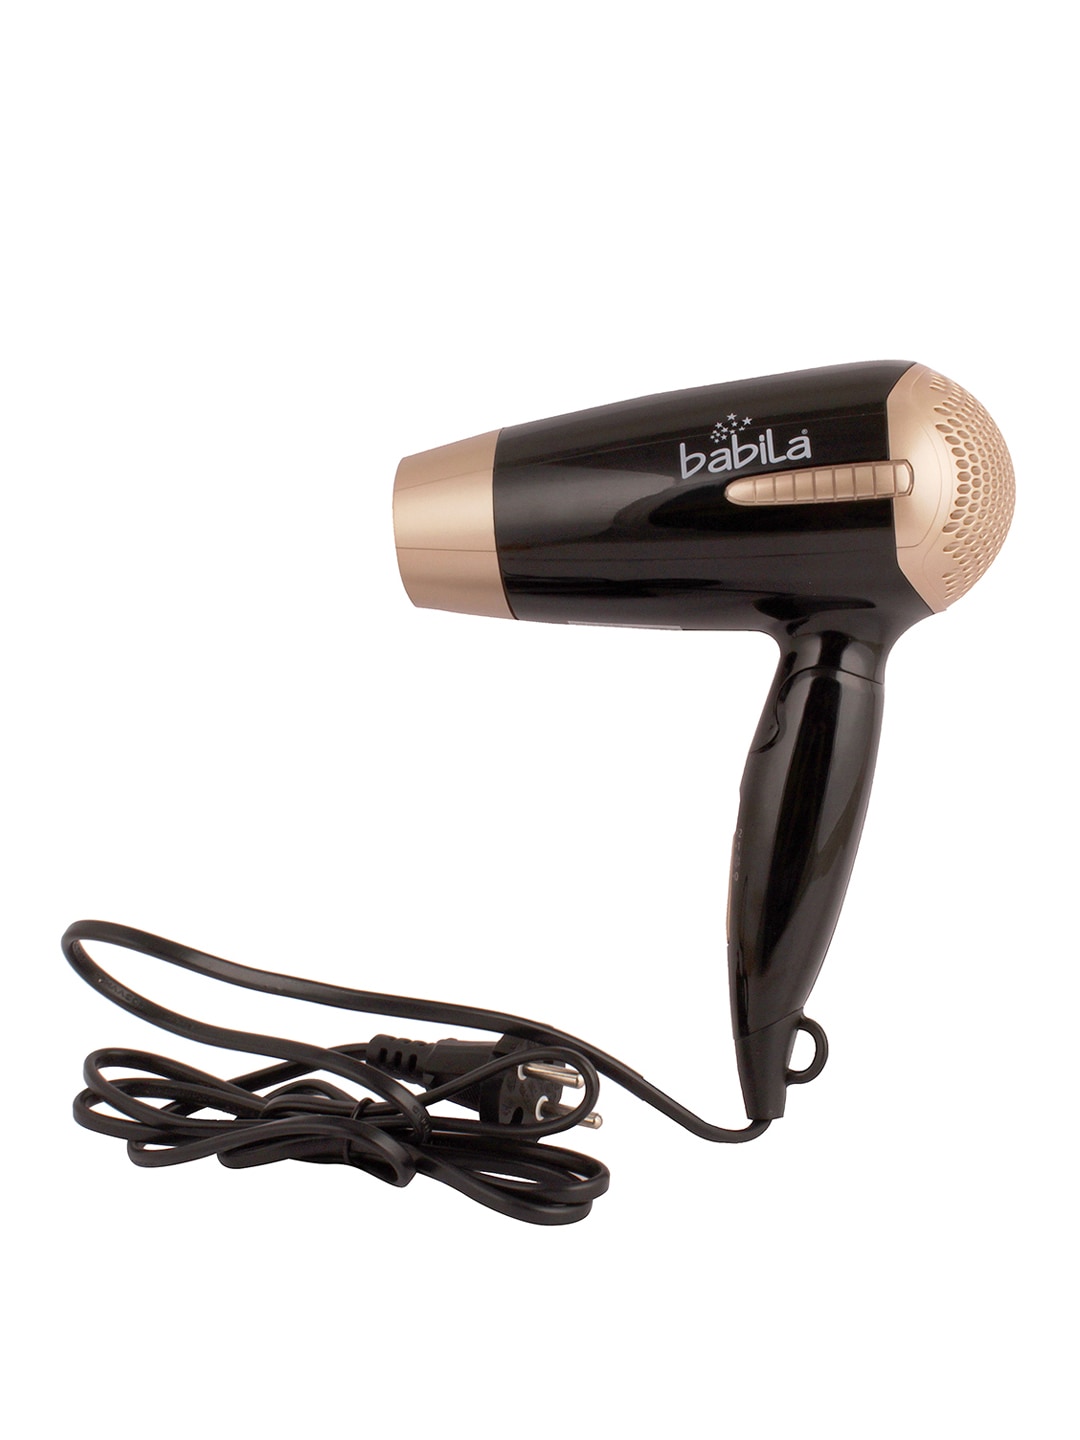 Babila Cool Way Hair Dryer 1200W Price in India, Full Specifications &  Offers 